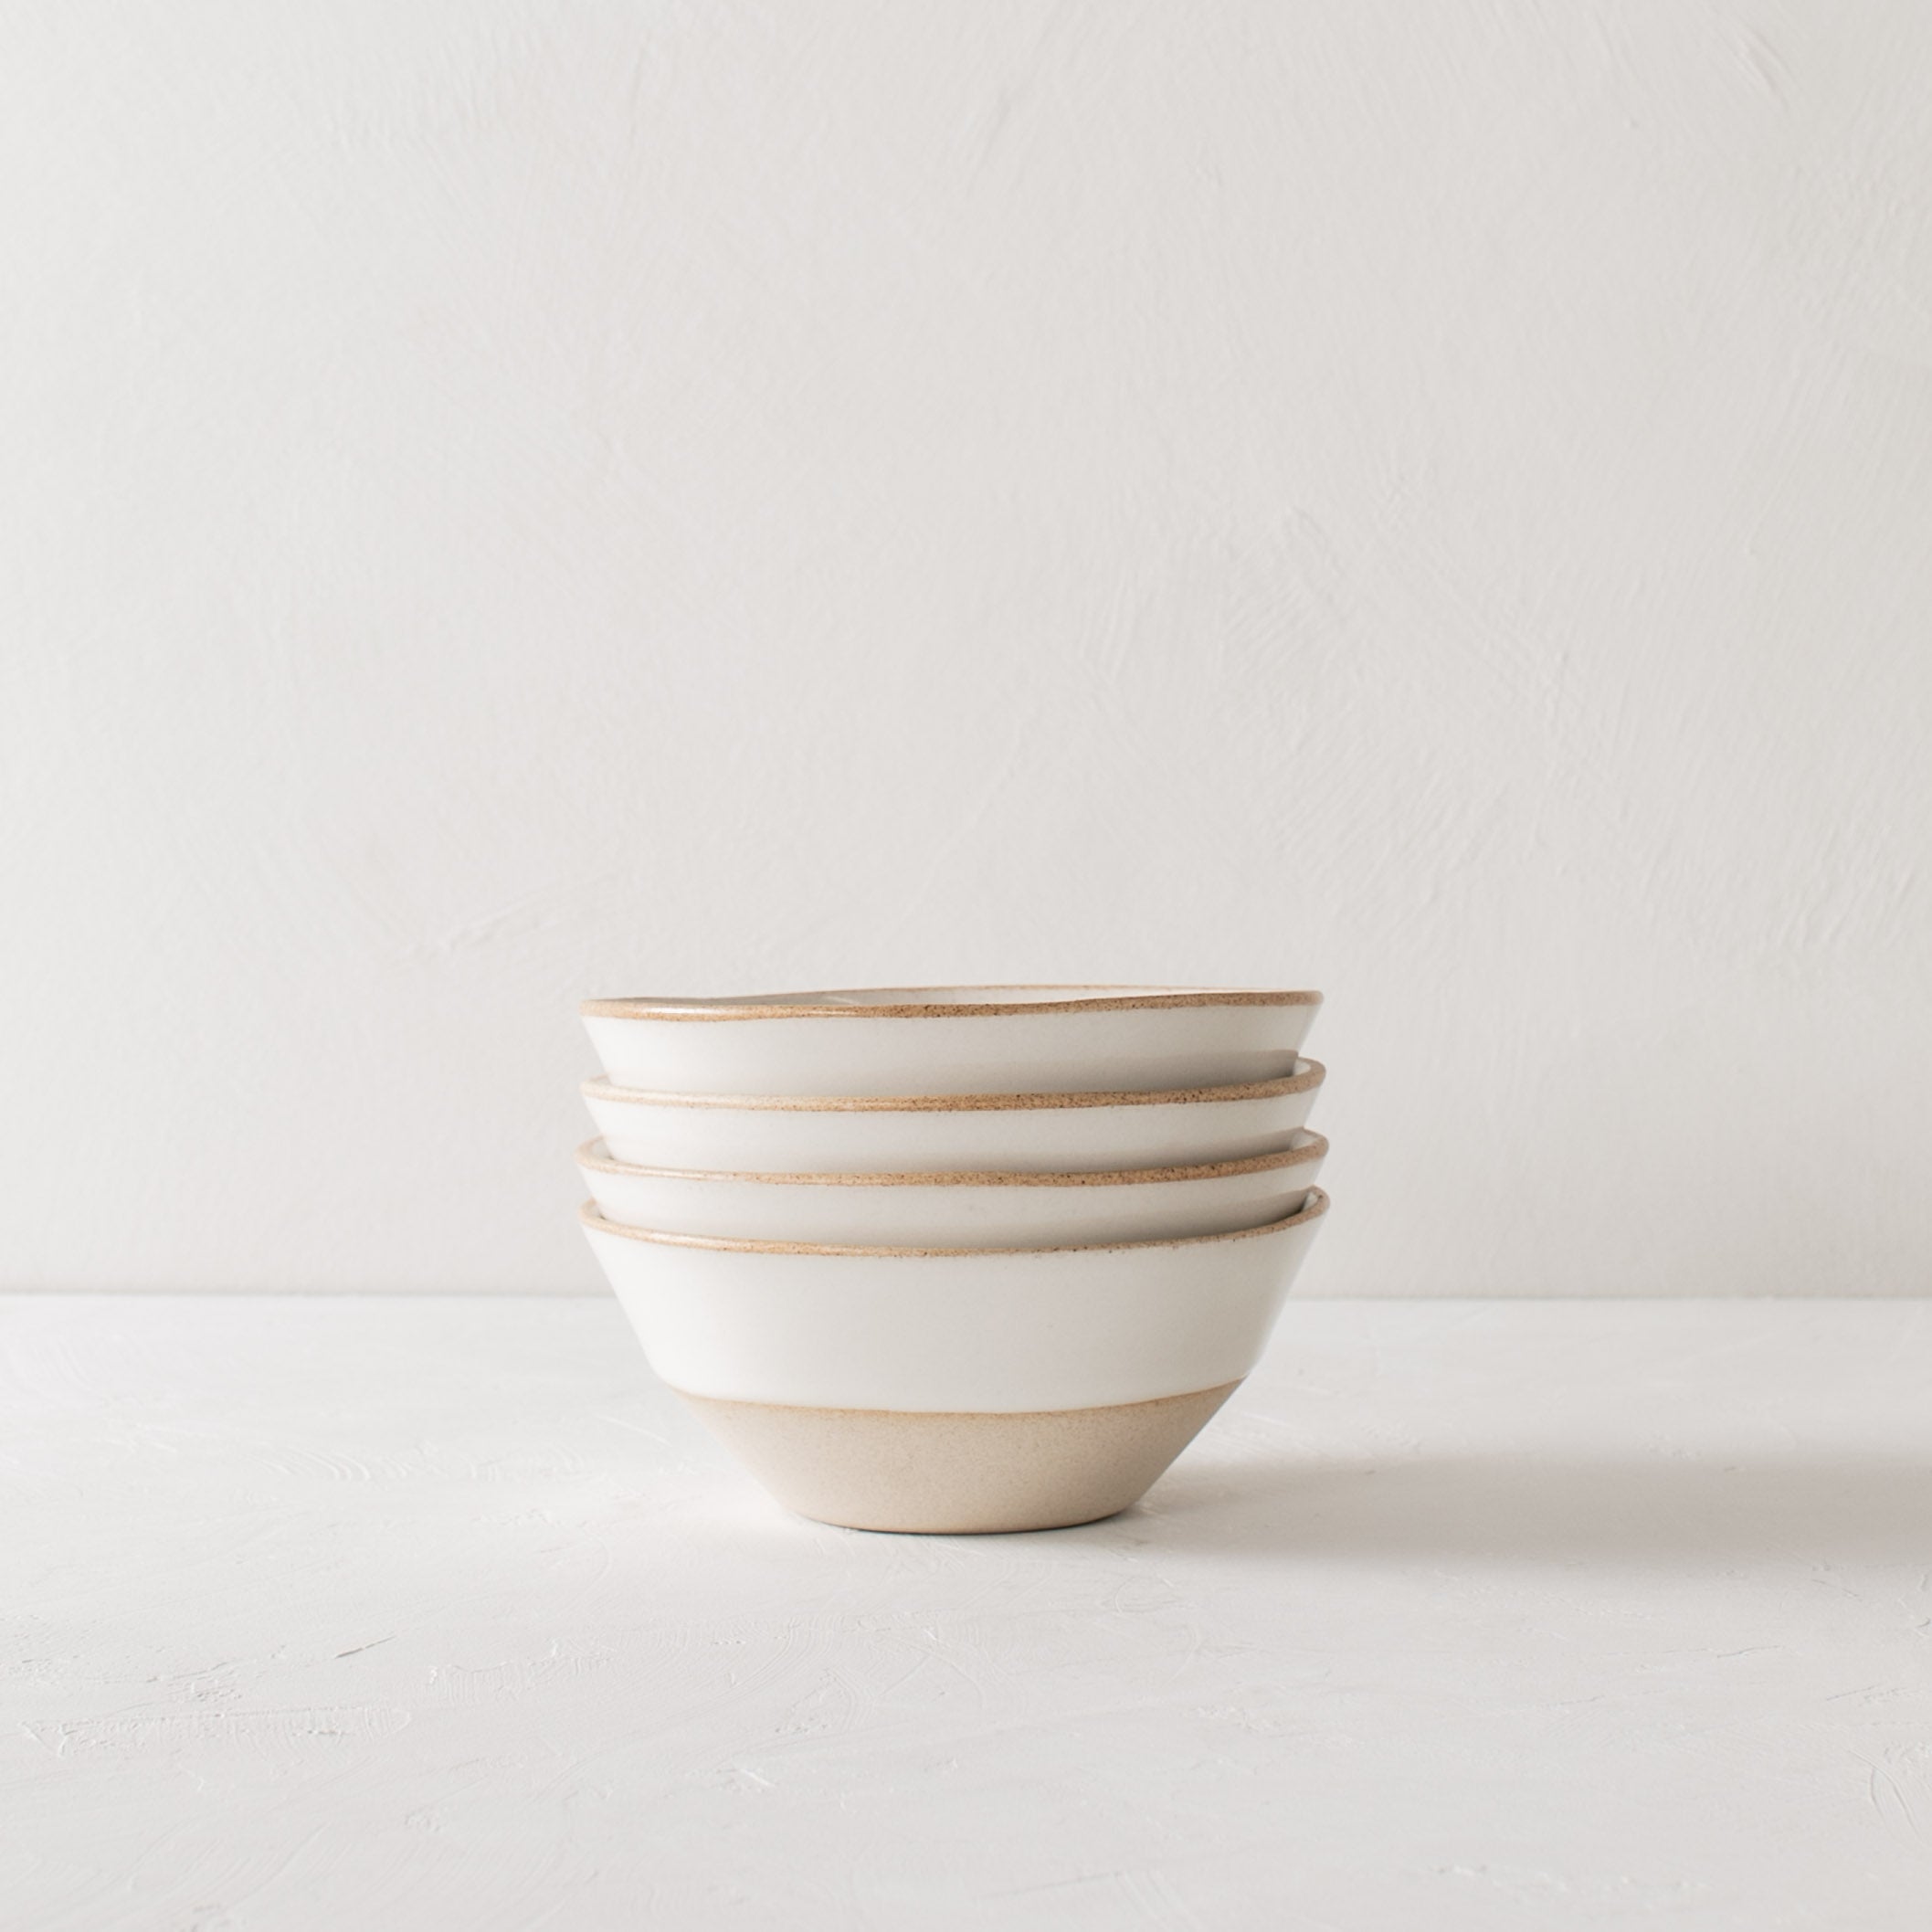 White ceramic bowls. Handmade glazed stoneware bowls, stacked together in a group of four. Bowls have exposed stoneware rims as well as bases. Centered in the image staged against a white textured wall and table top. Designed and sold by Convivial Production, Kansas City Ceramics.